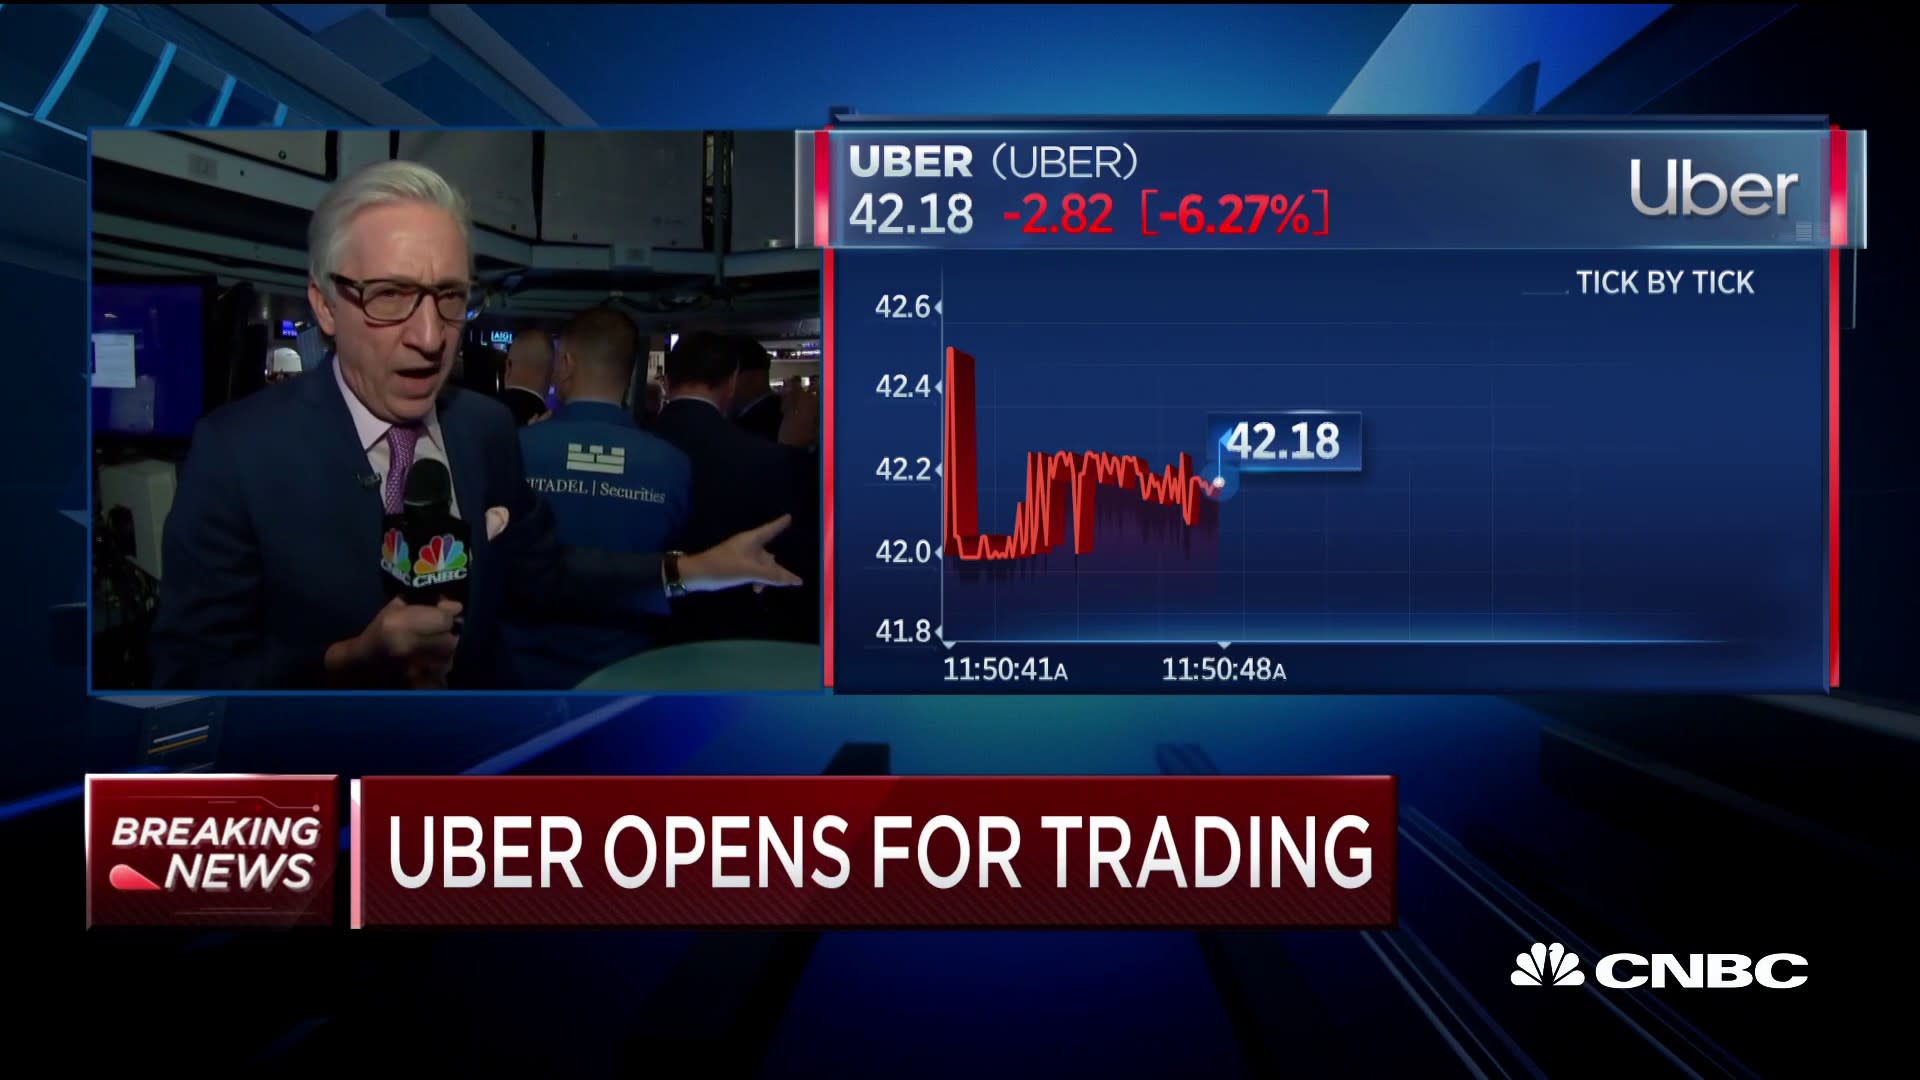 Uber begins trading at the NYSE below IPO price1920 x 1080